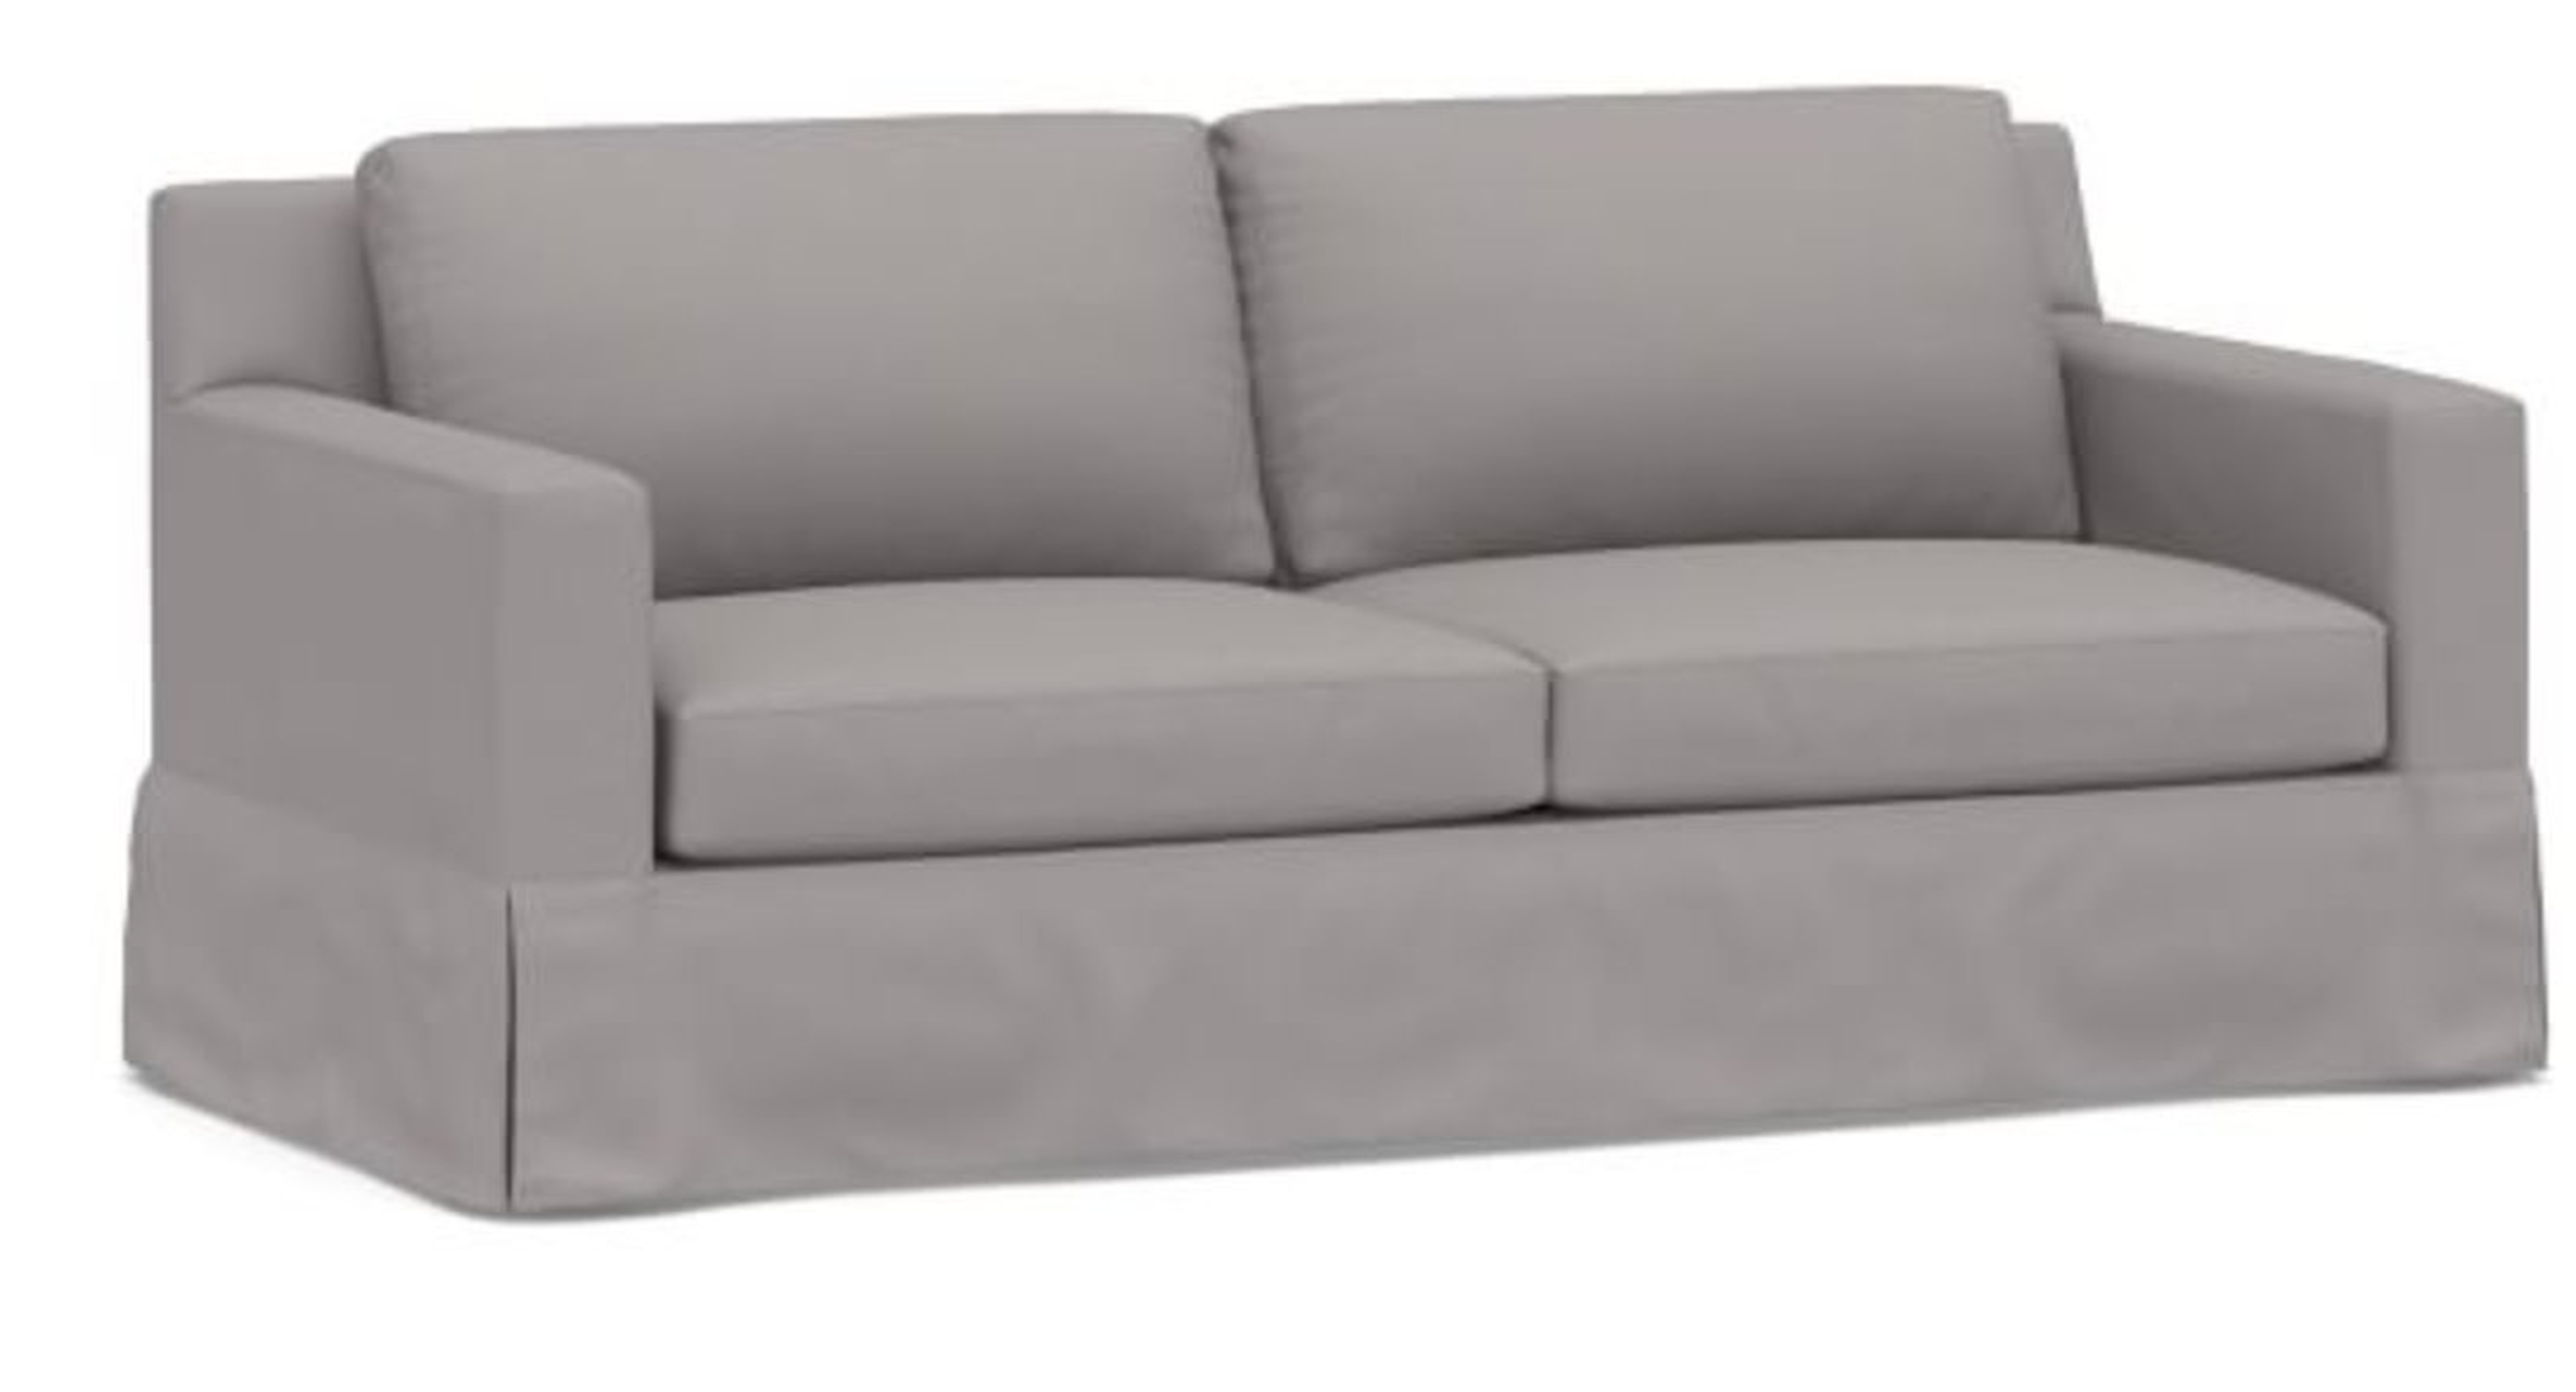 York Square Arm Slipcovered Sofa 80.5", Down Blend Wrapped Cushions, Performance Twill Metal Gray - Pottery Barn